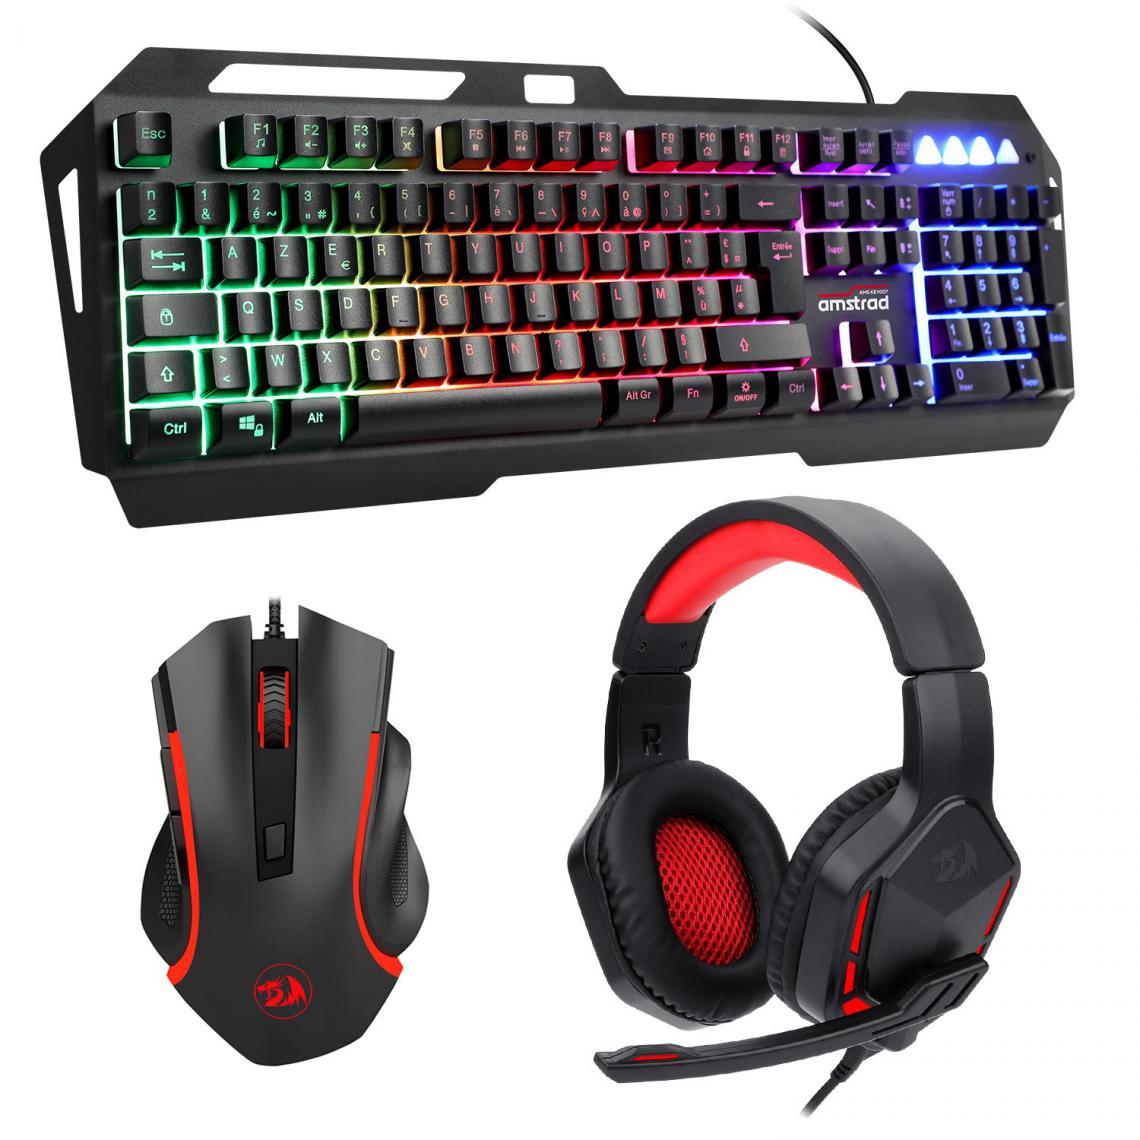 Redragon - Pack Gamer: Clavier Amstrad KEY007 + Souris Redragon NOTHOSAUR (M606) 6 boutons, 3200 DPI + Casque THEMIS (H220) - Pack Clavier Souris